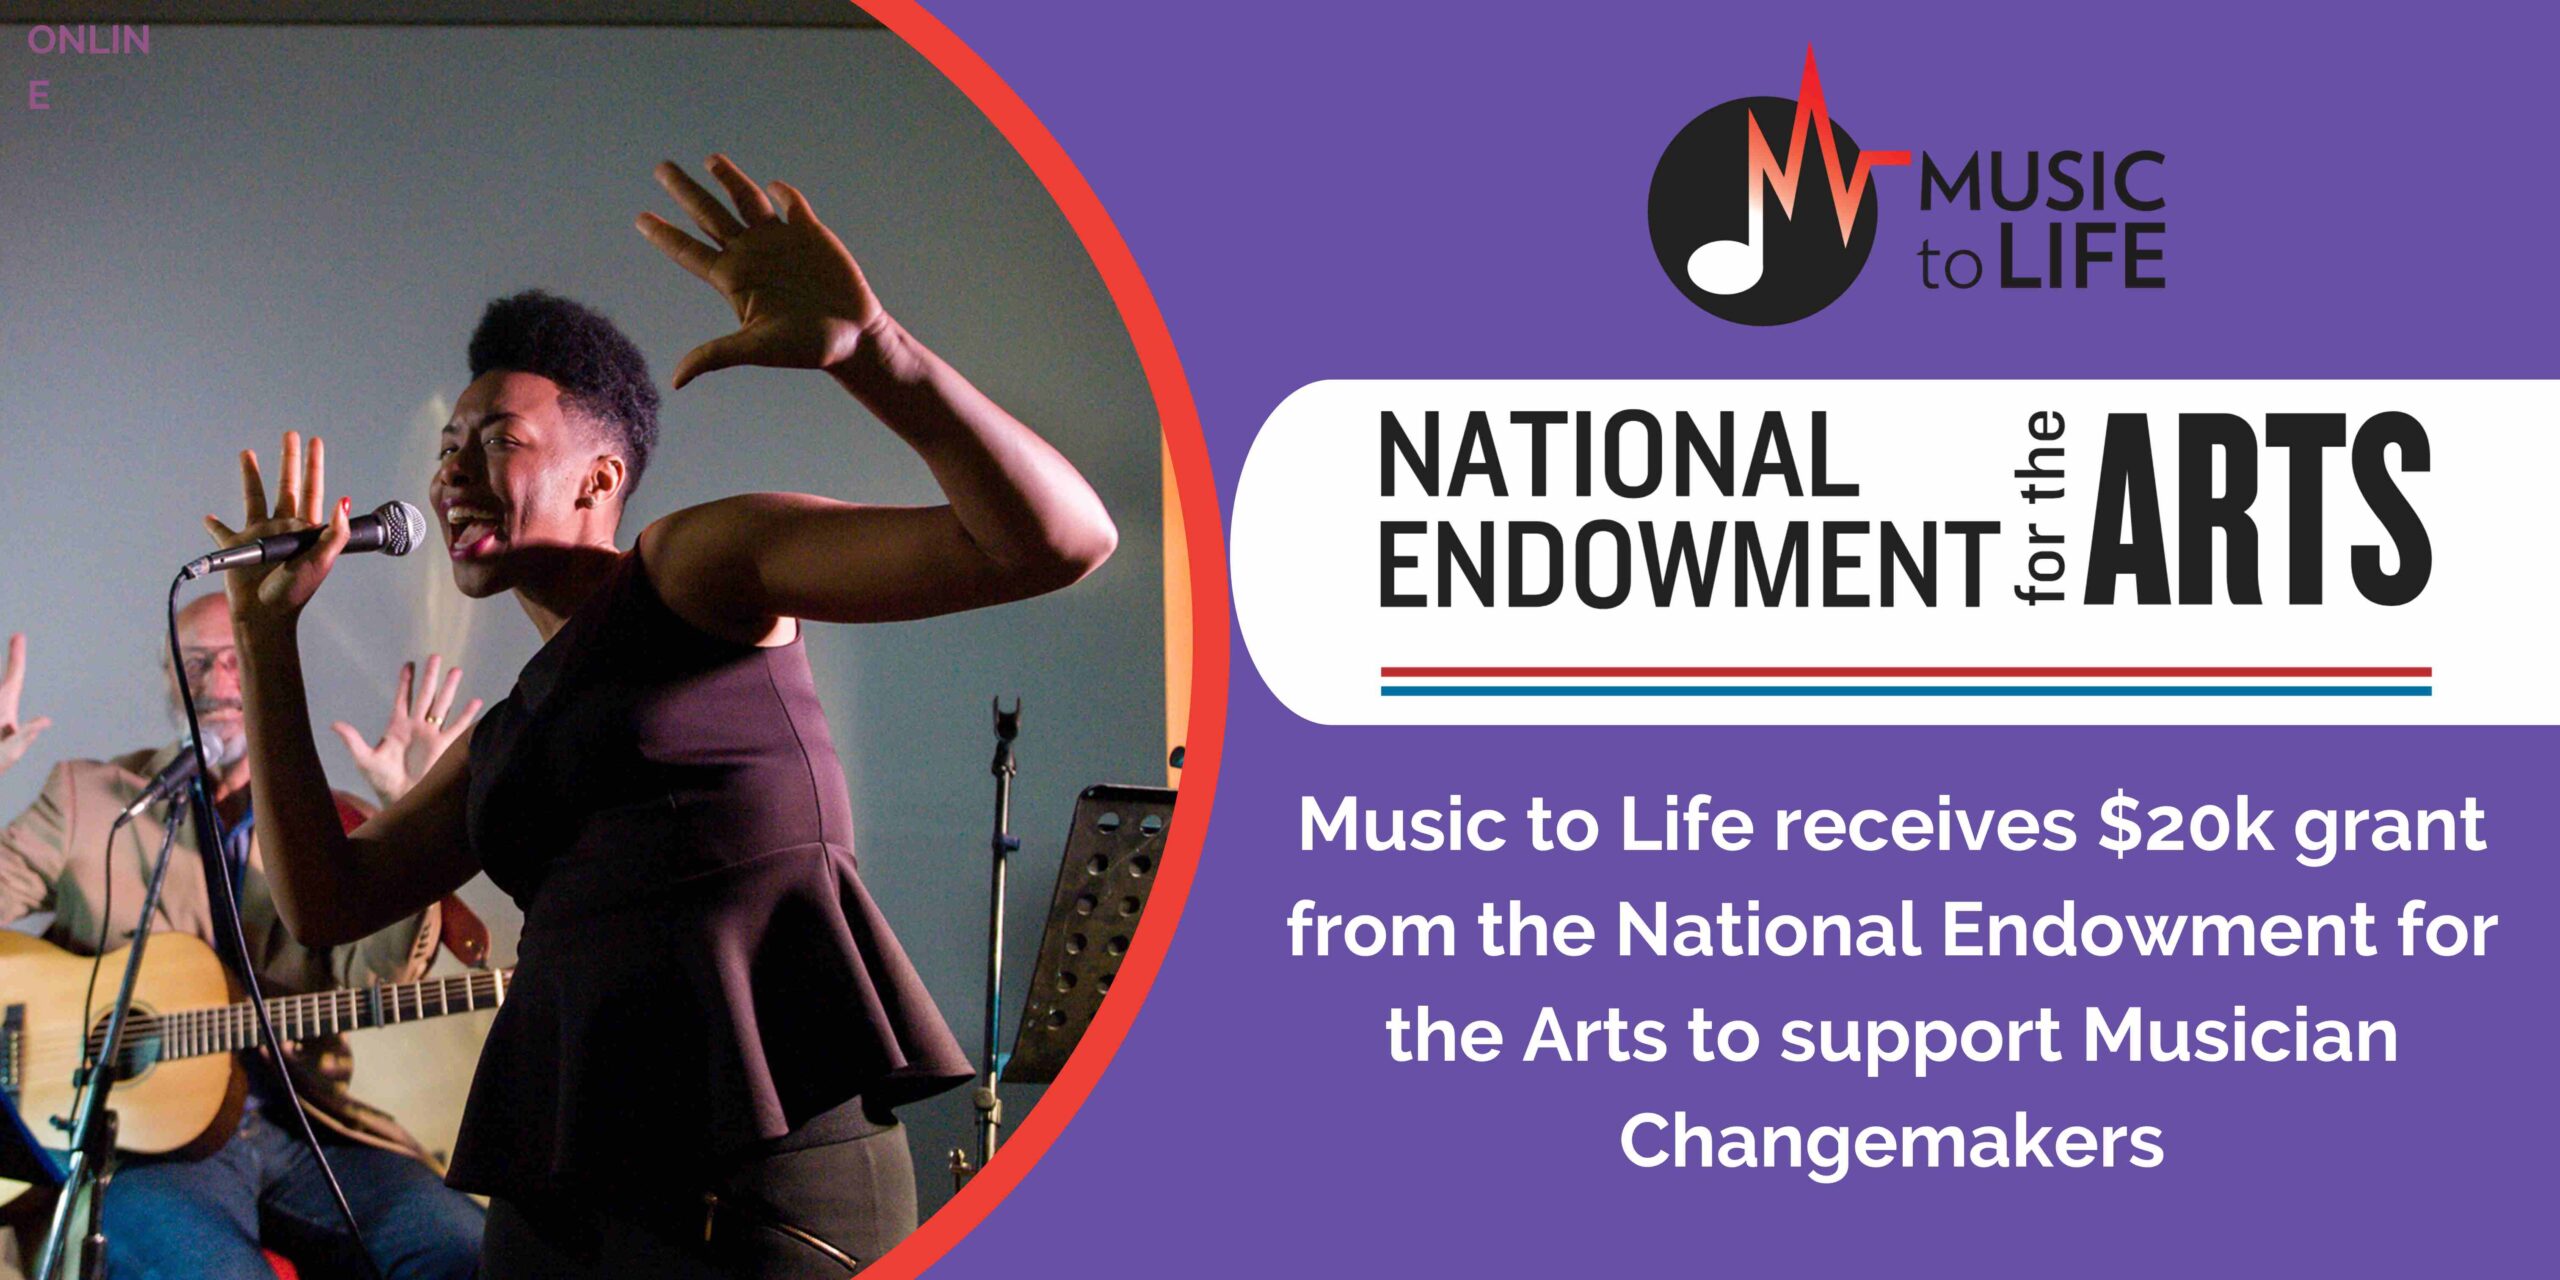 National Endowment for the Arts Awards Music to Life their First Federal Grant of $20K